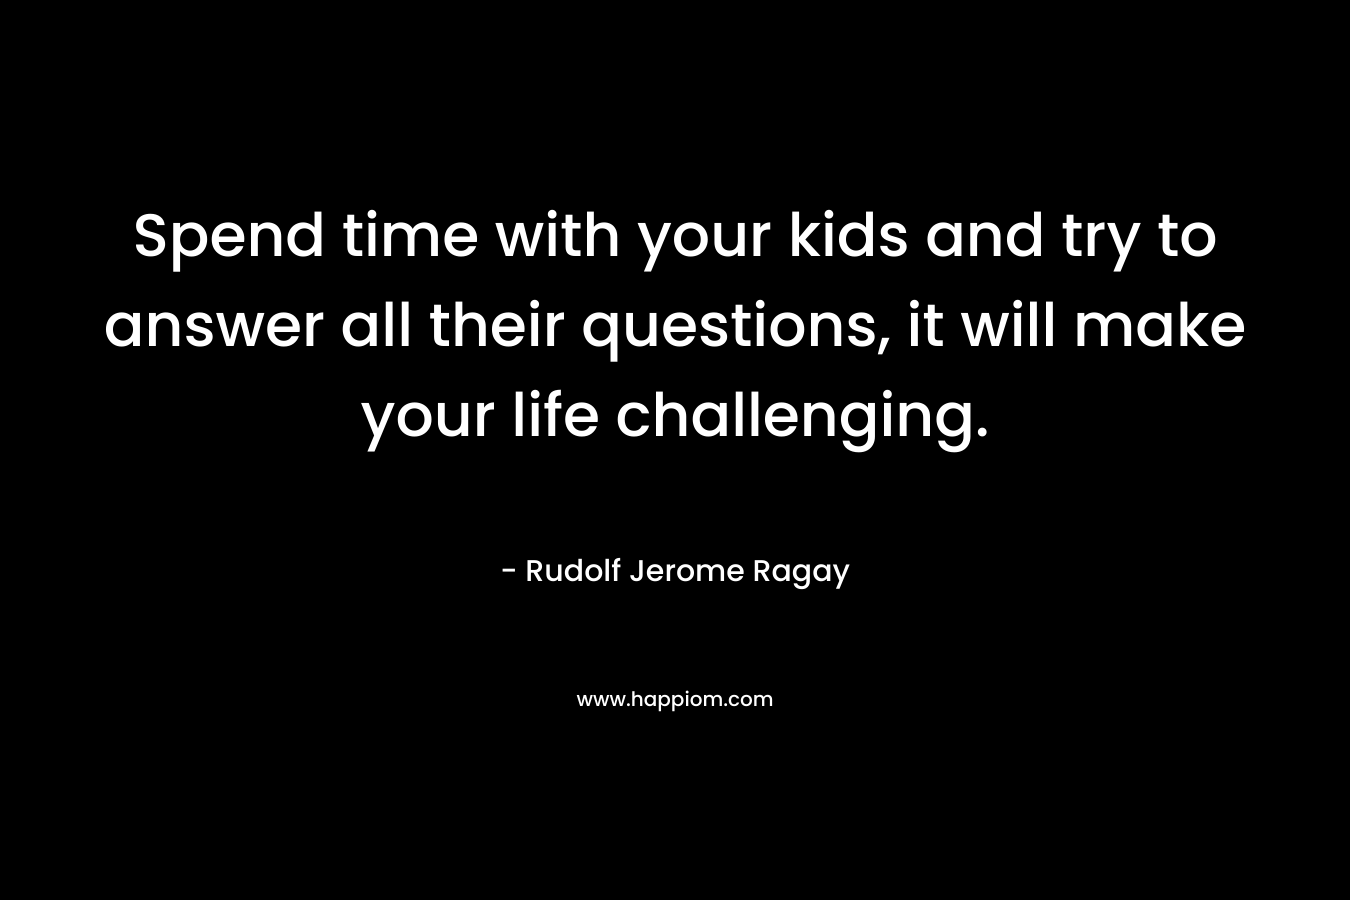 Spend time with your kids and try to answer all their questions, it will make your life challenging. – Rudolf Jerome Ragay